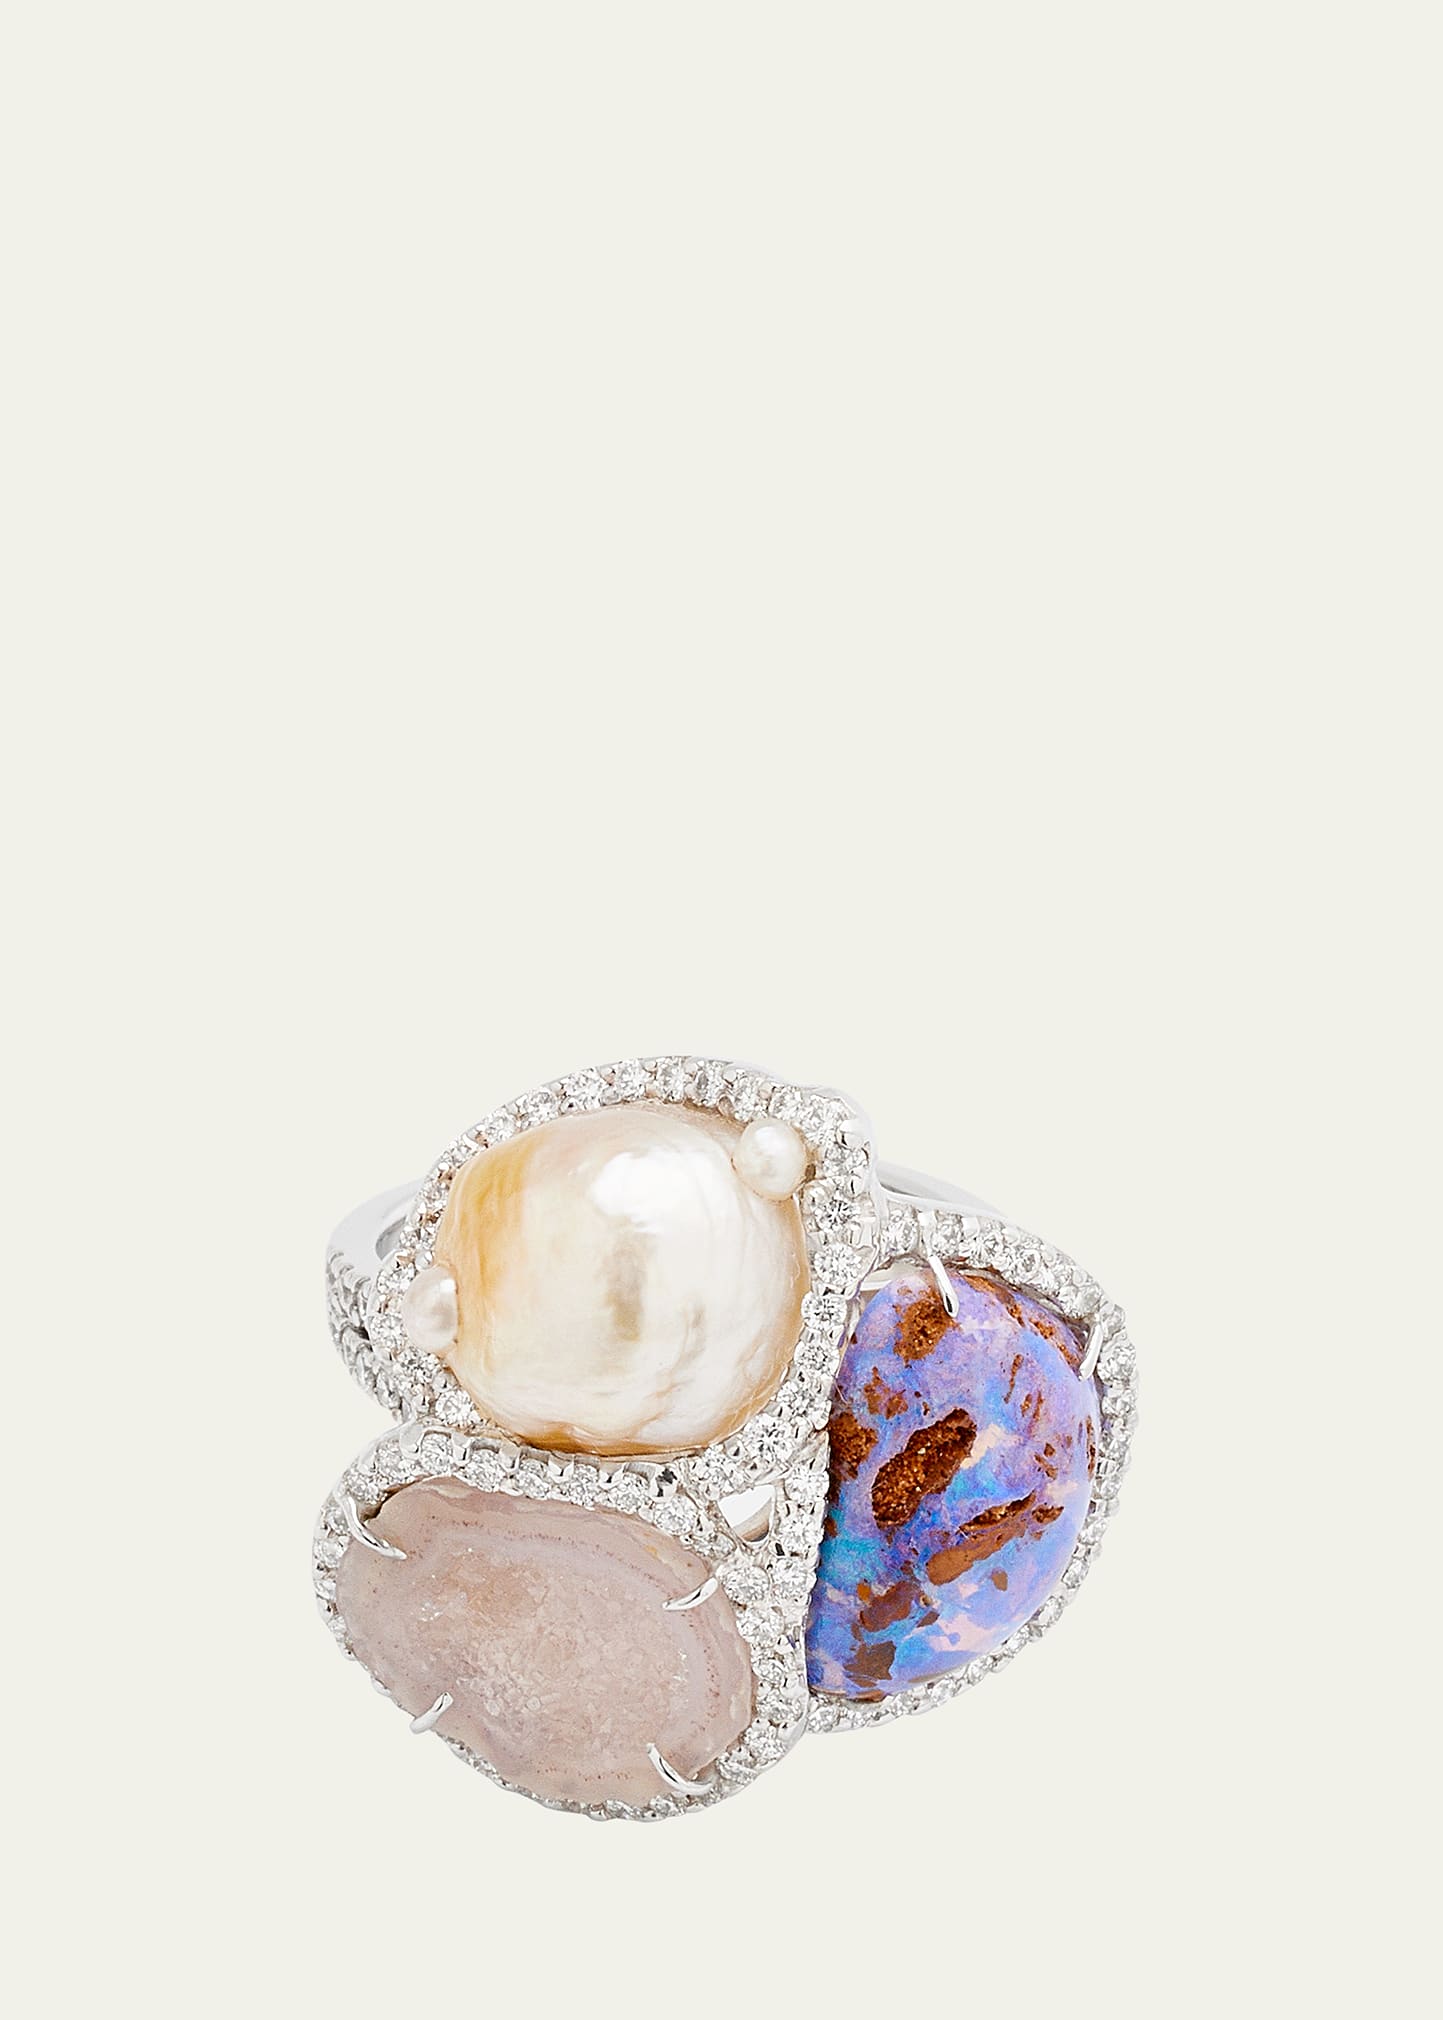 White Gold Ring with Geode, Pearl, Opal and Diamonds